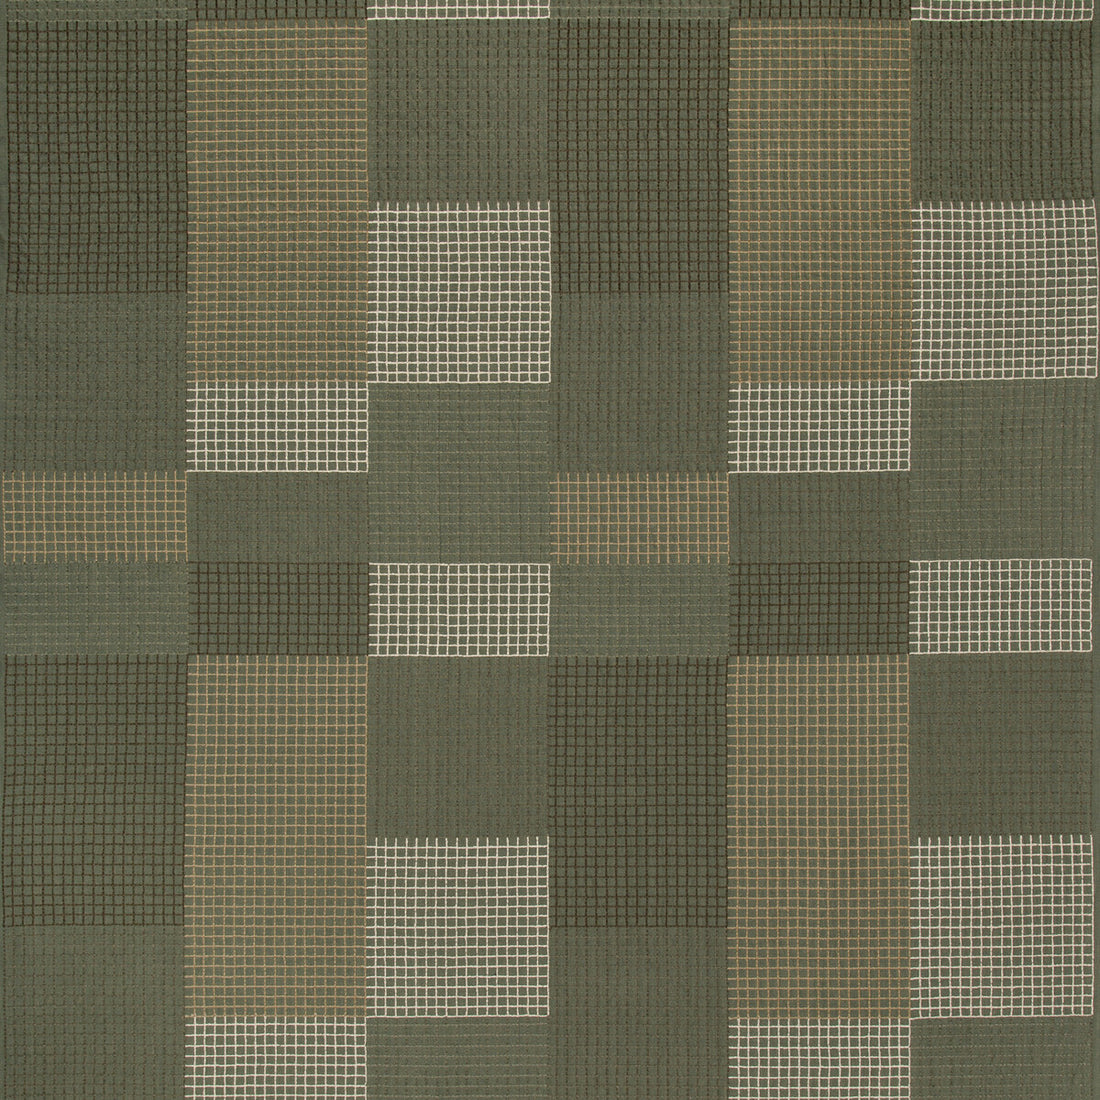 Gridlock fabric in hunter color - pattern GWF-3756.316.0 - by Lee Jofa Modern in the Kelly Wearstler V collection